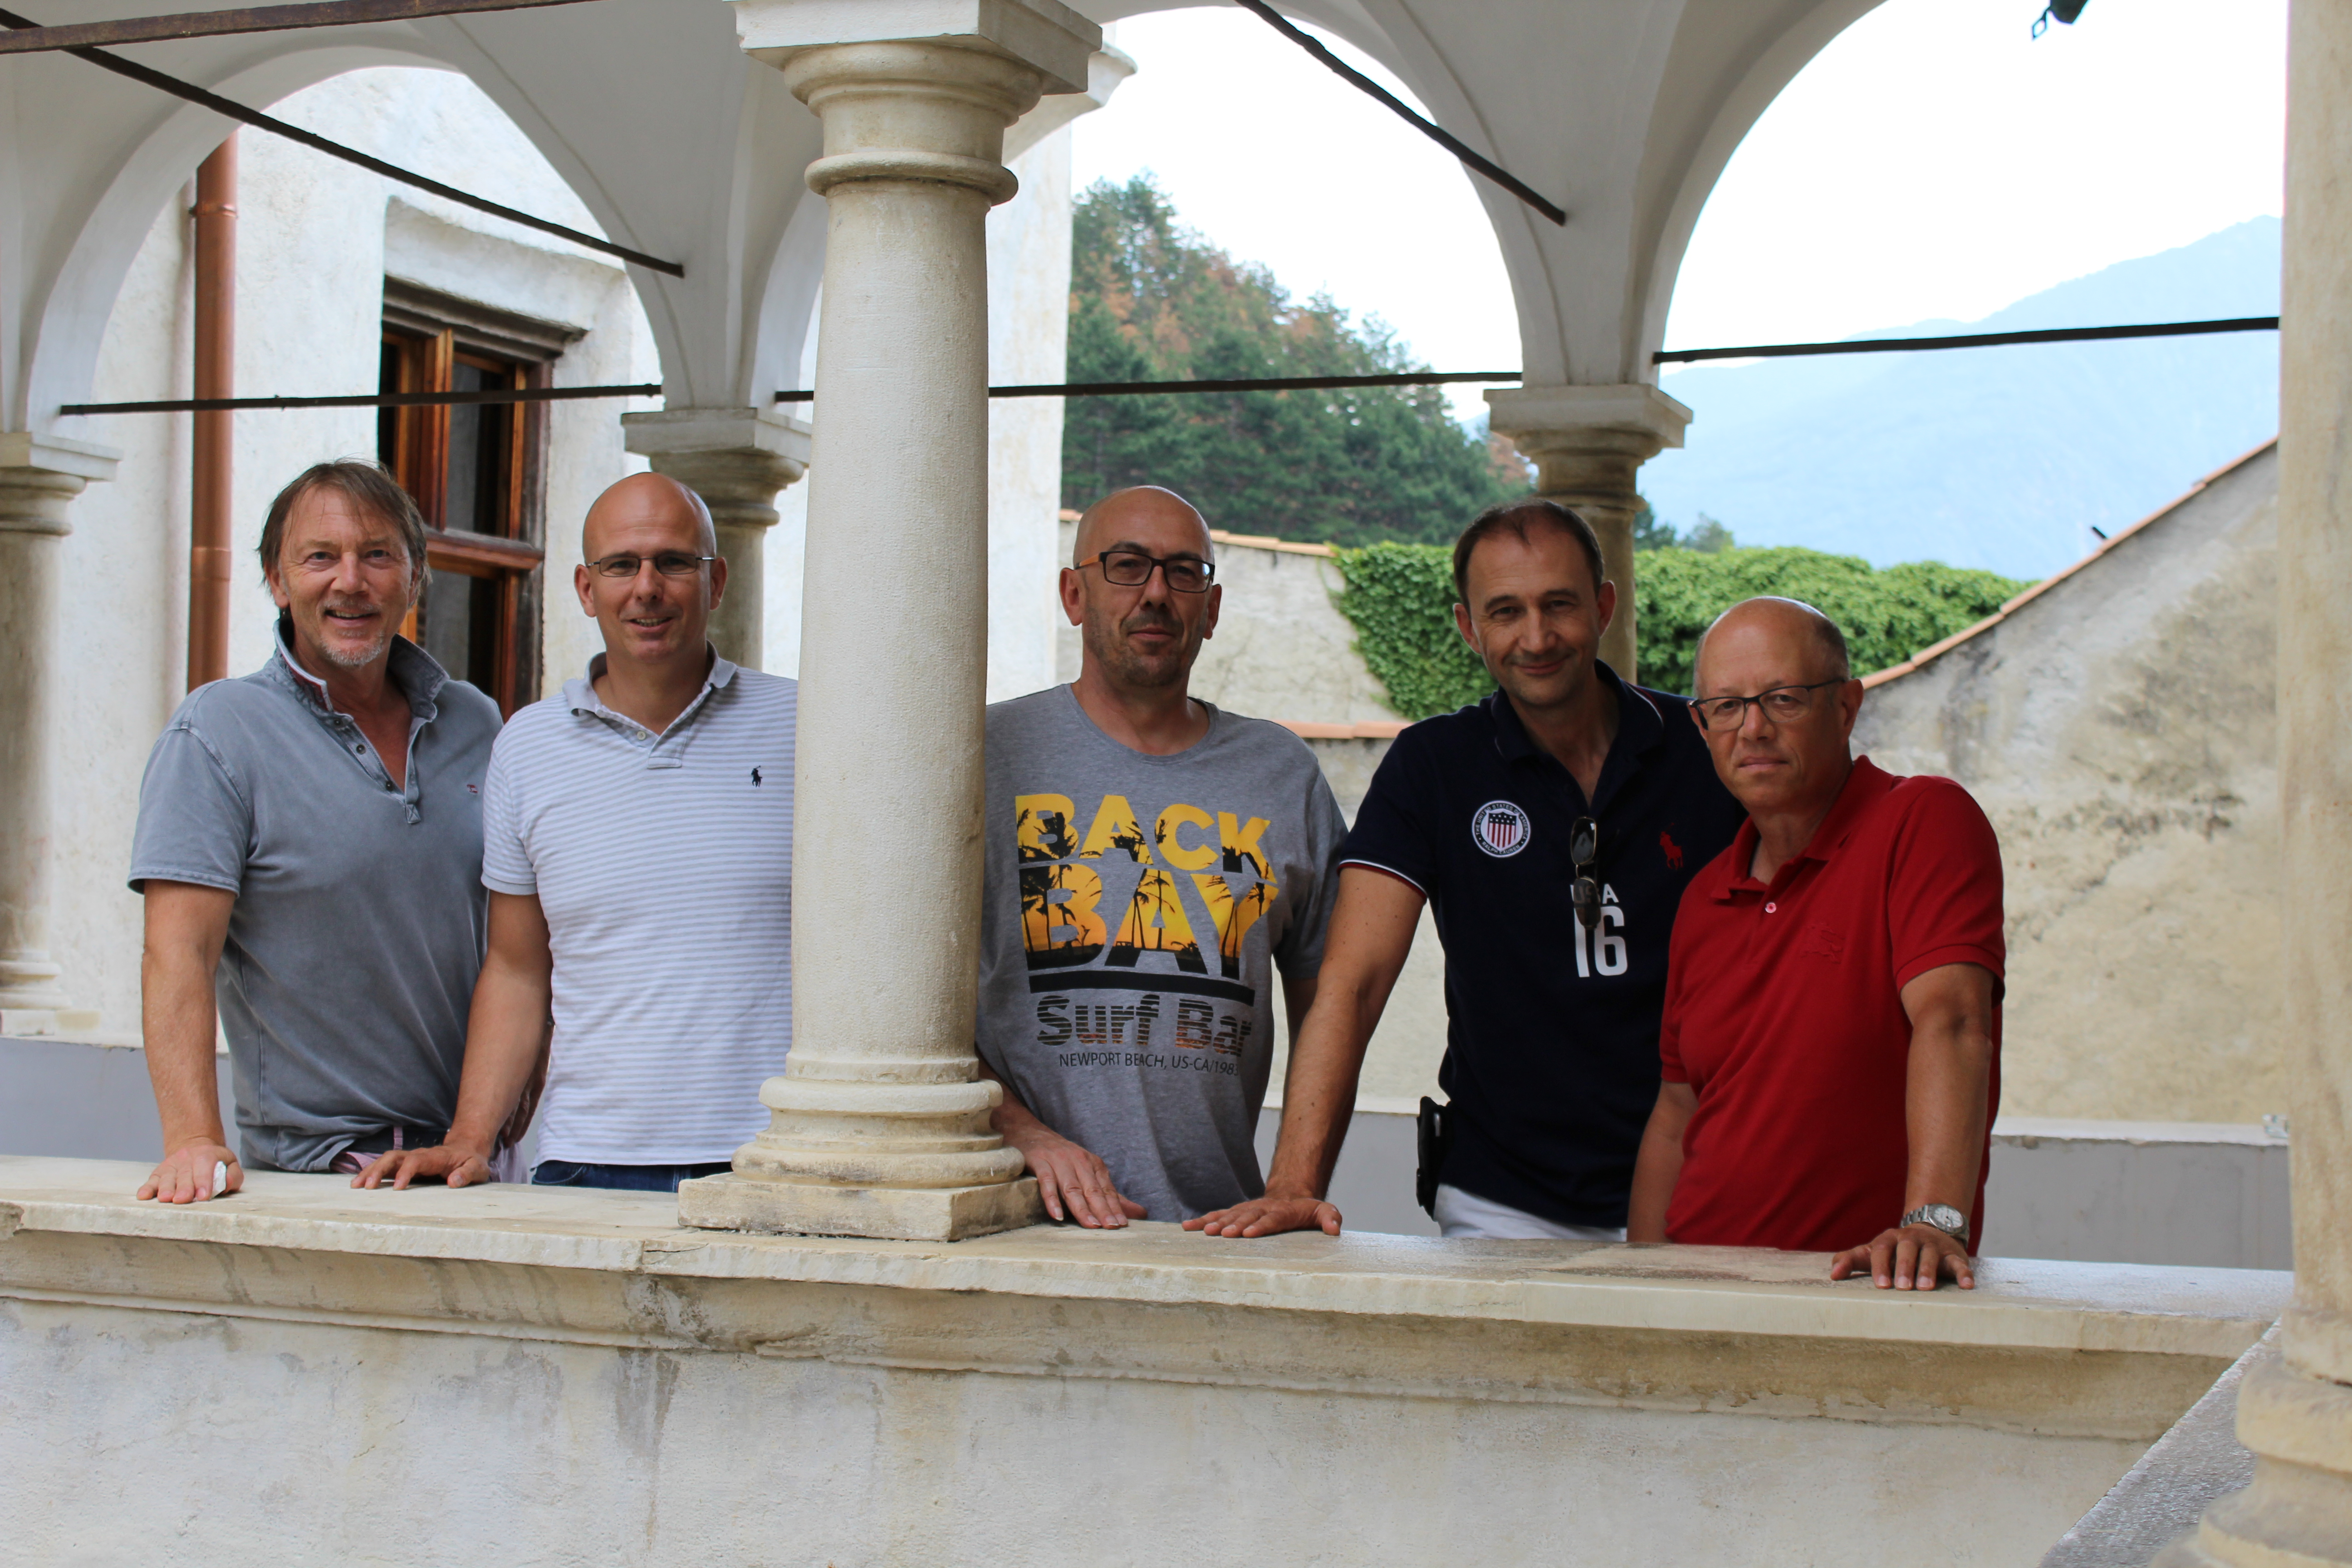 The Electro Terminal partners at the strategy meeting at the end of June, from left to right: Martin Köcher, Michael Prior, Helmut Priewasser, Walter Mittermüller and Johann Stark